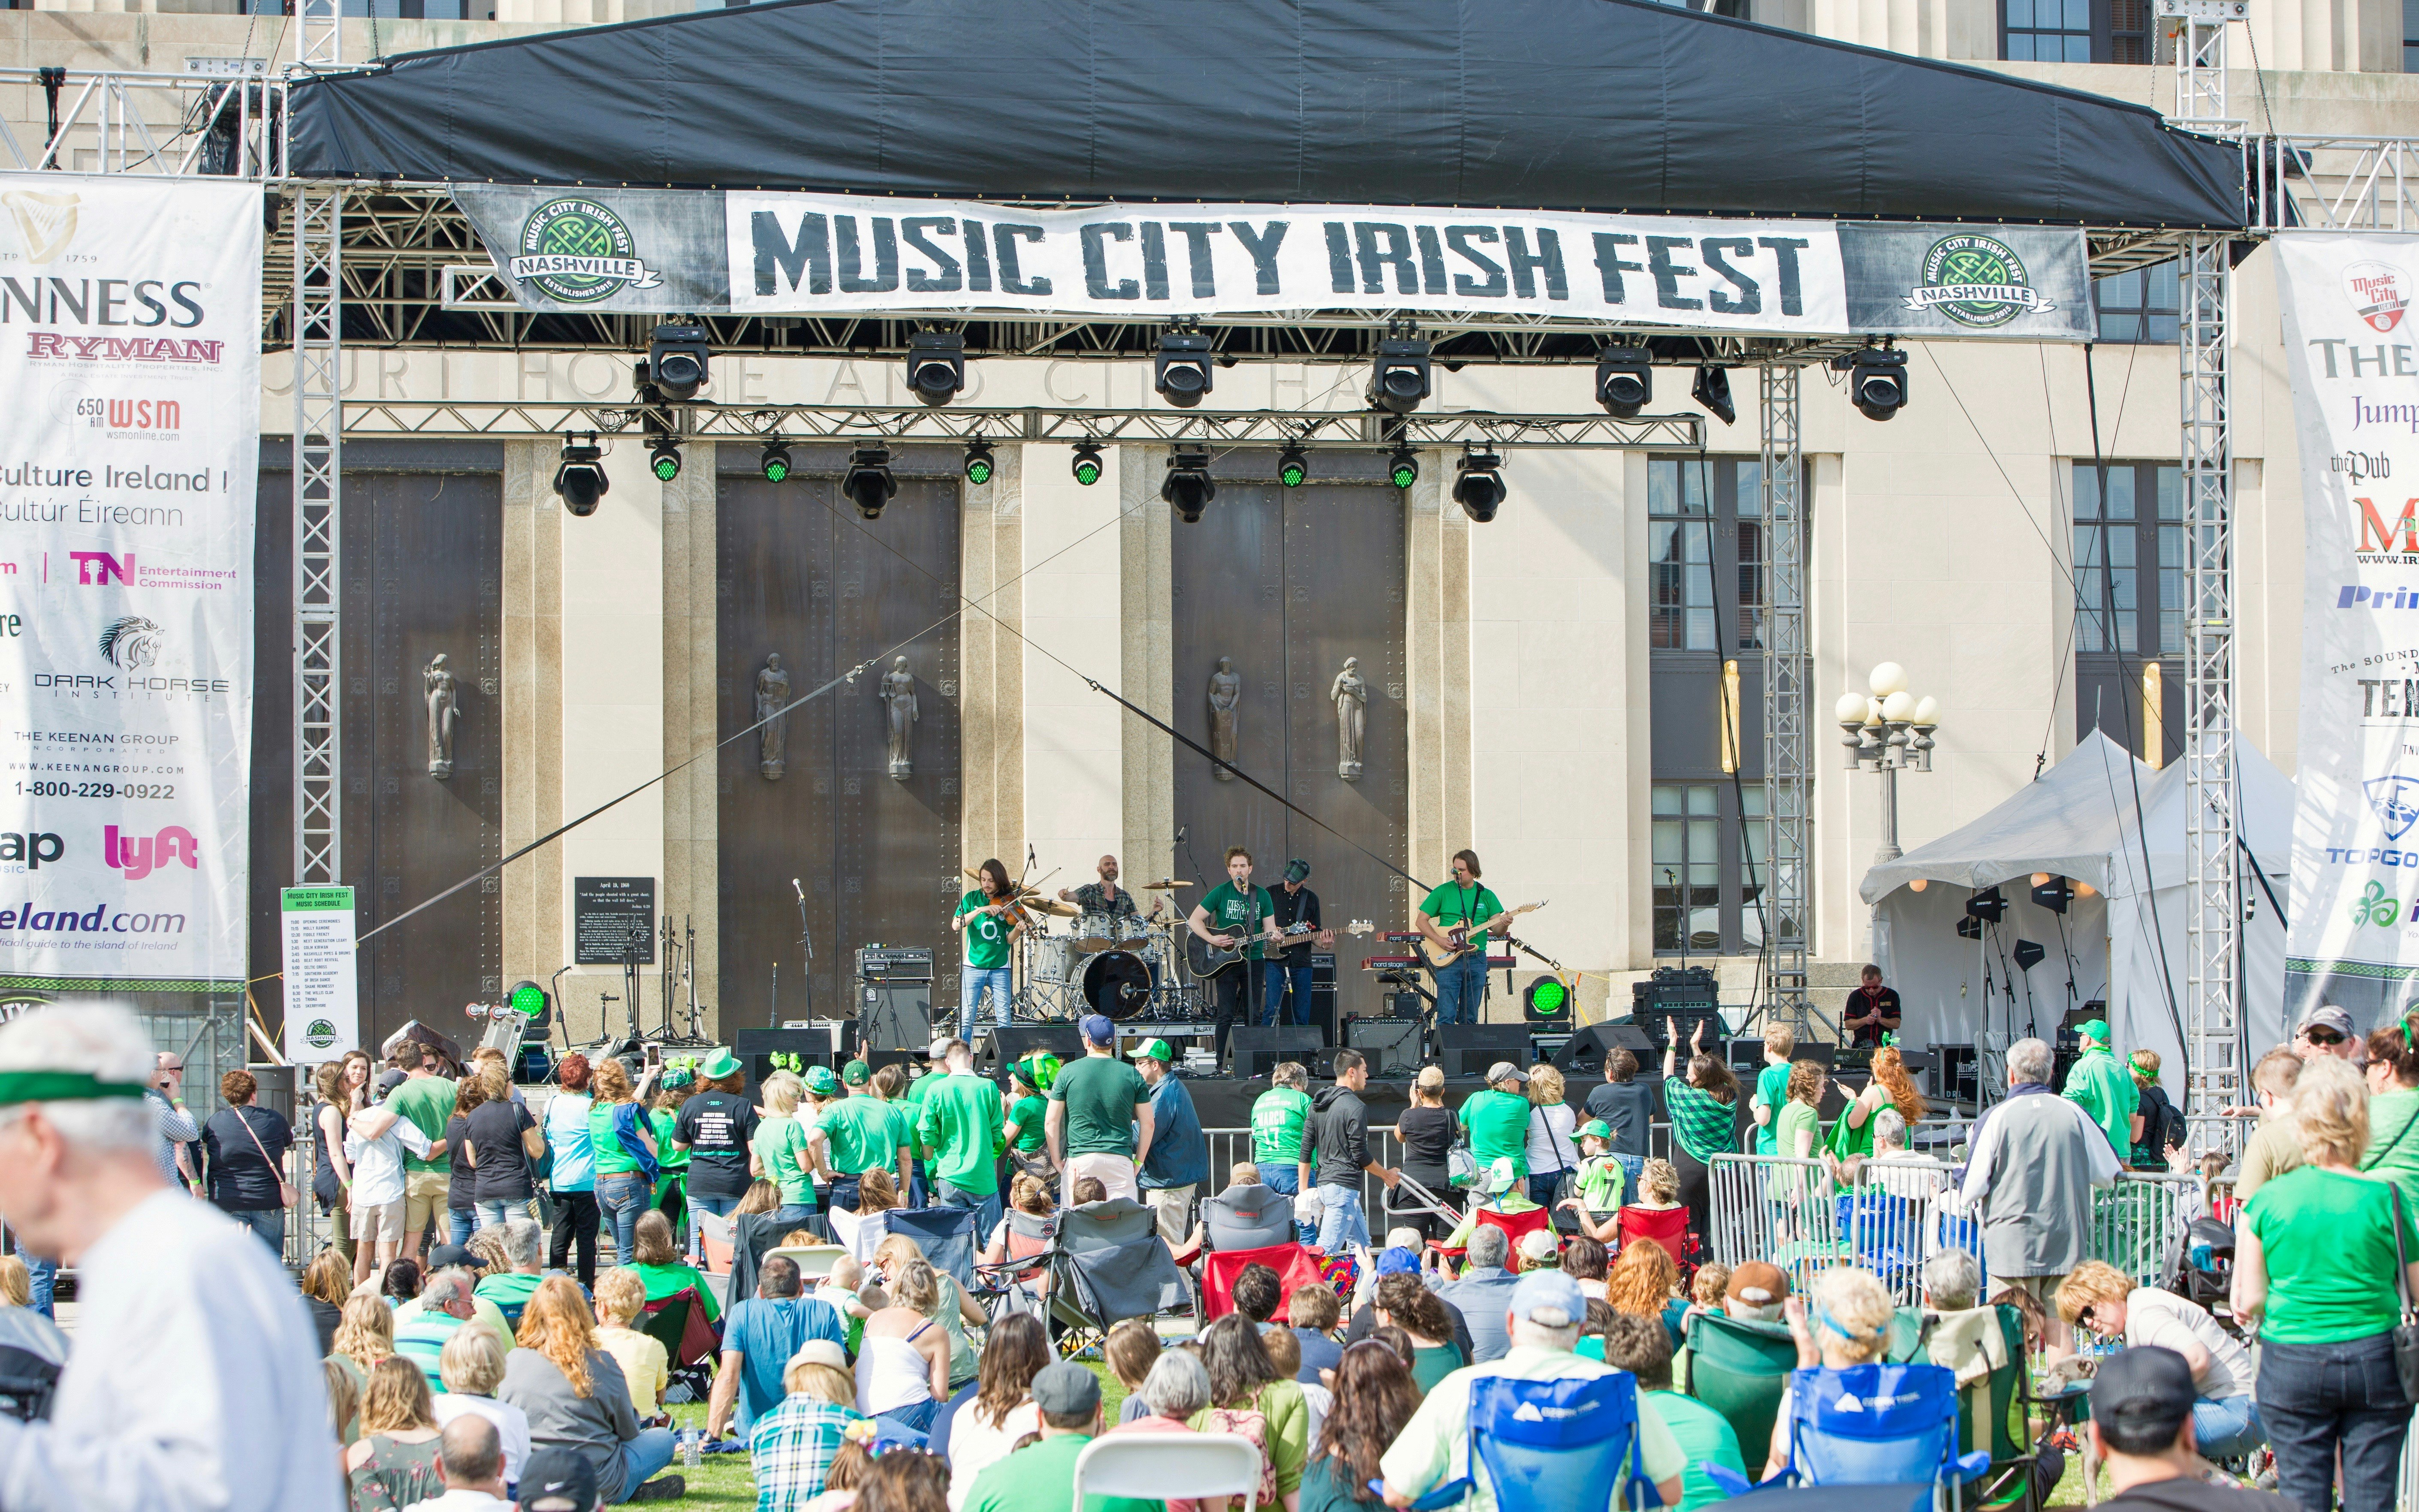 Musicians perform to a crowd in Nashville on St Patrick's Day